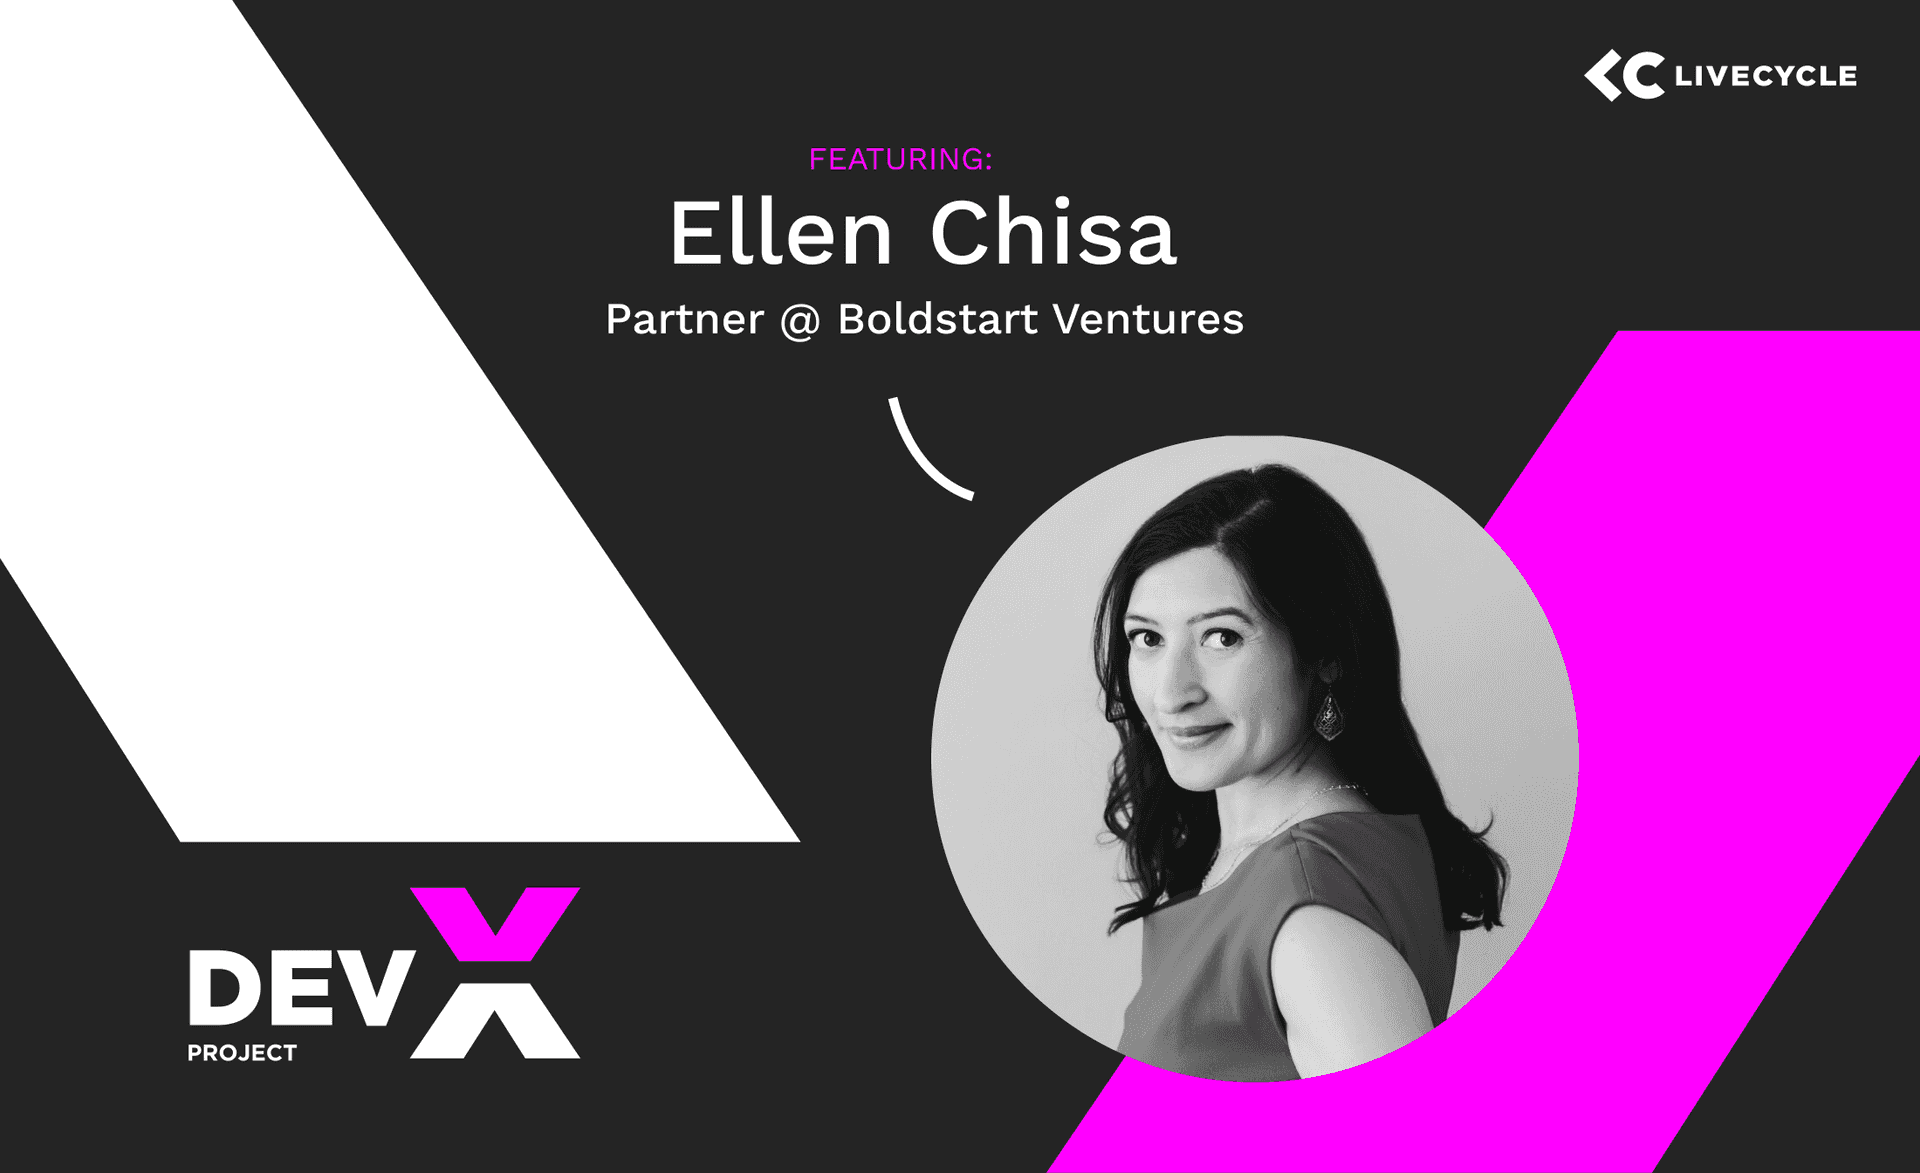 The Dev-X Project: Featuring Ellen Chisa